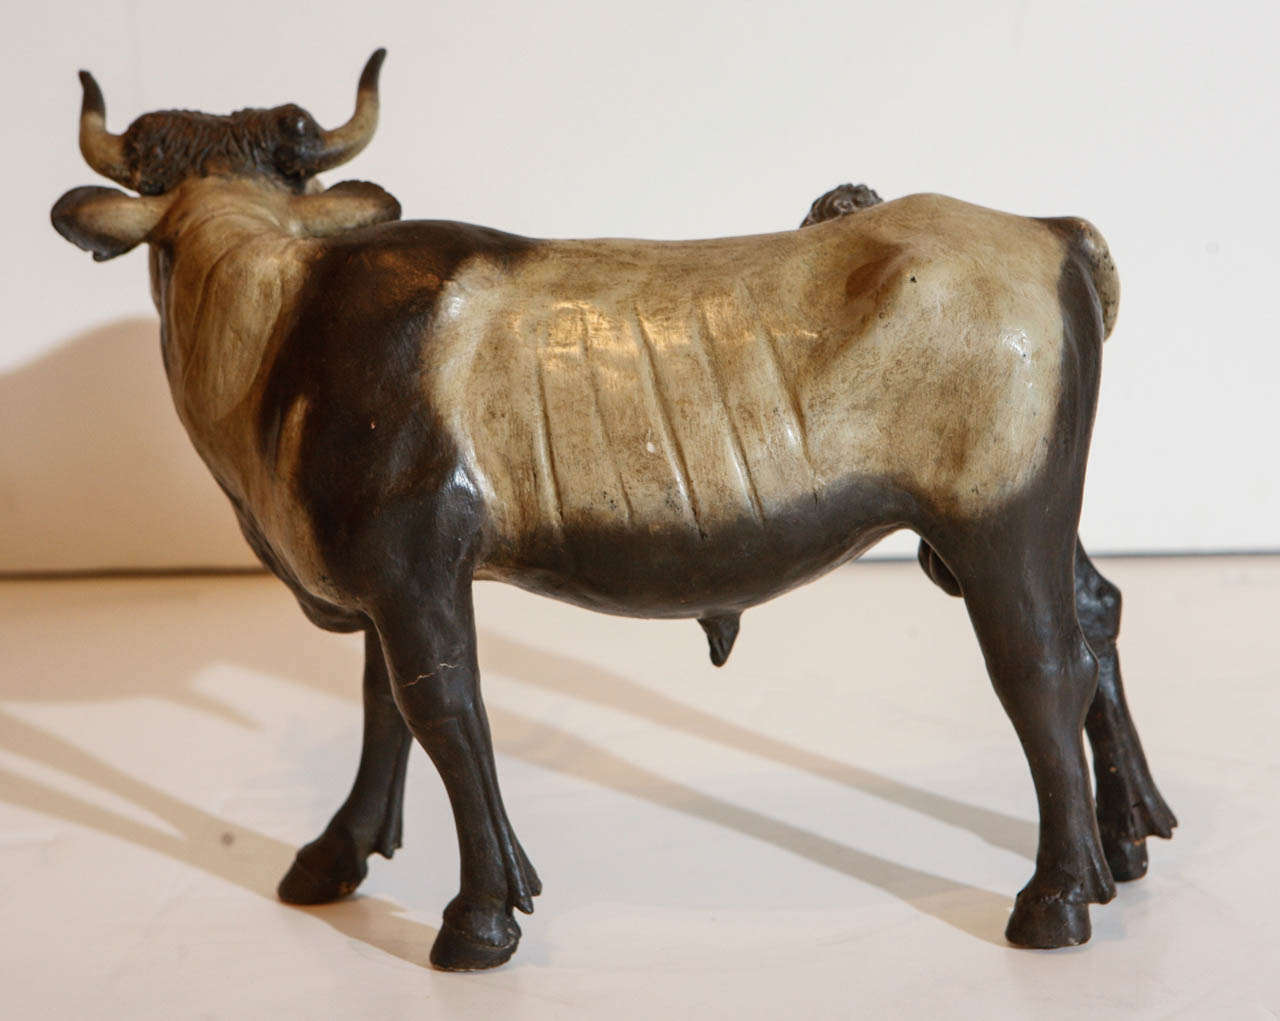 Hand-Painted 19th Century Bull Figurine In Excellent Condition For Sale In Newport Beach, CA